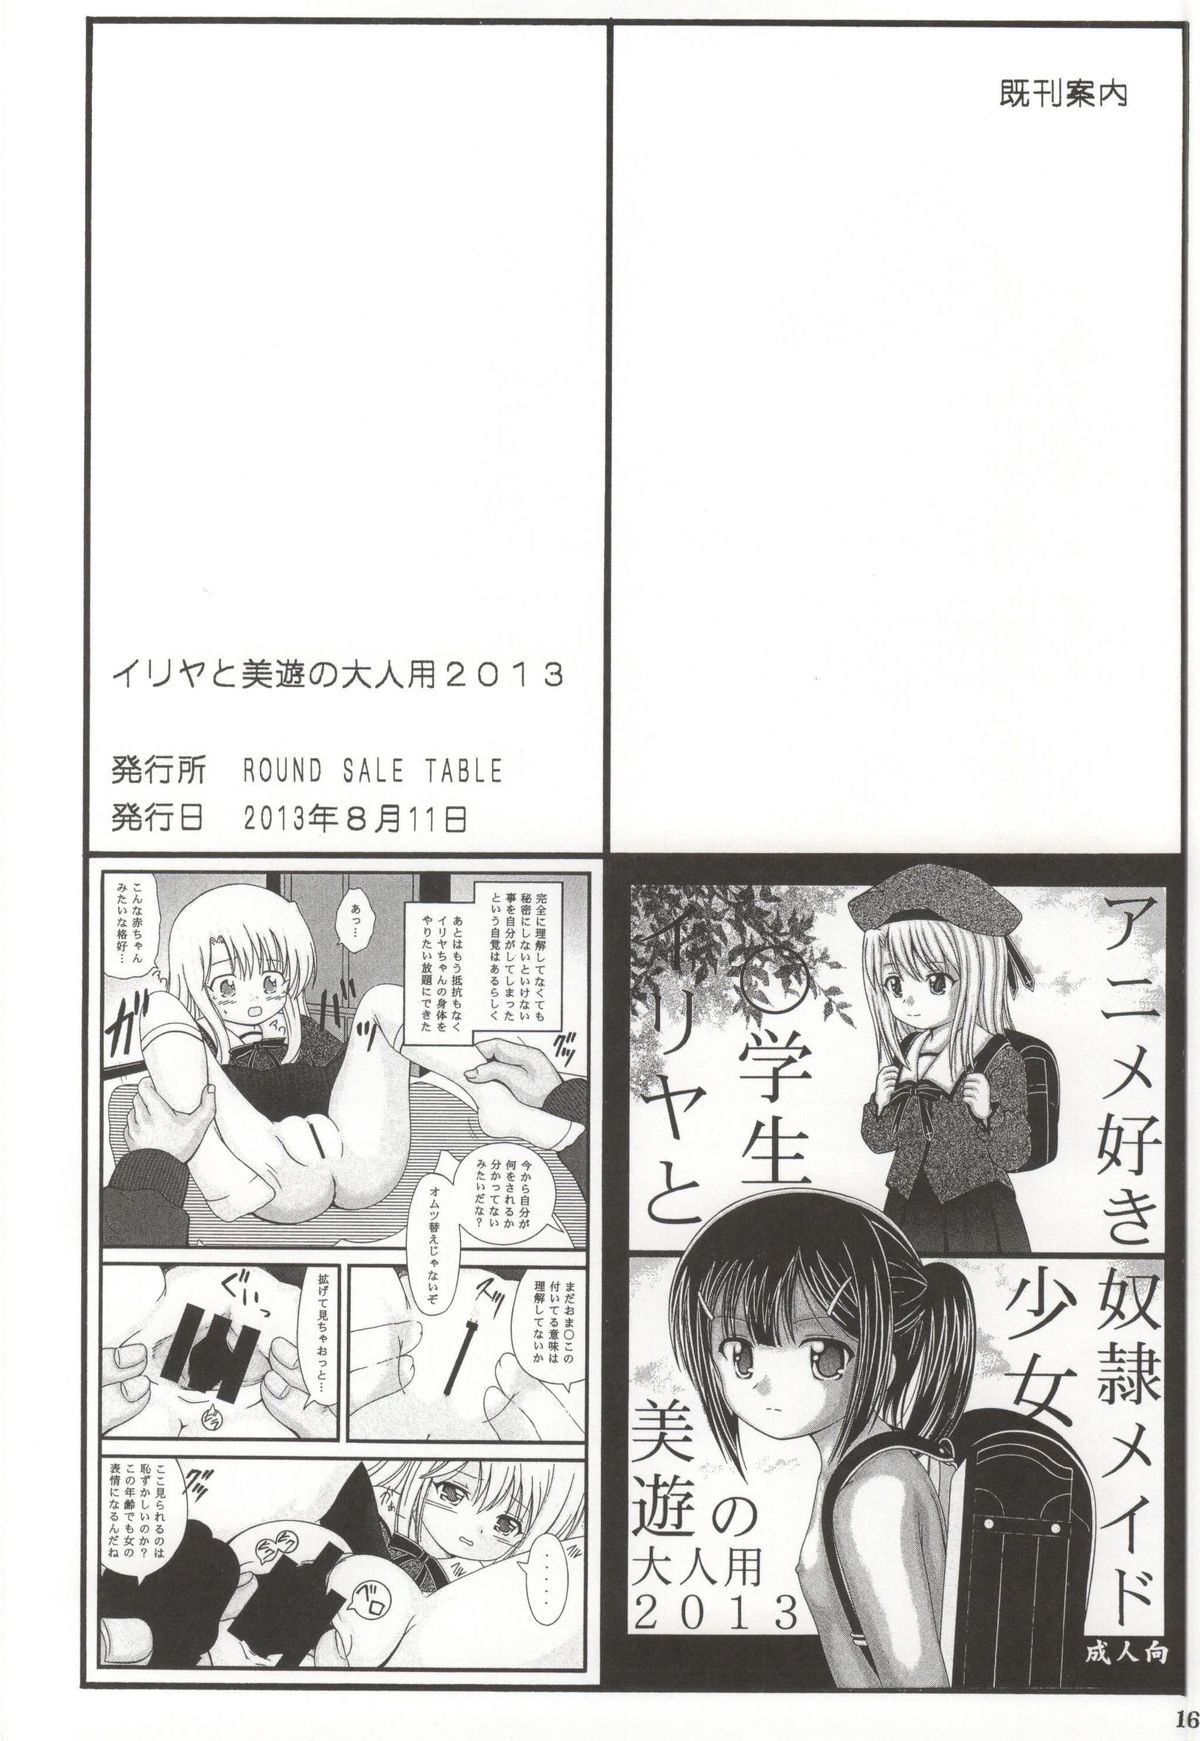 (C86) [ROUND SALE TABLE (ROUND SALE TABLE)] Ransel Est no Otona-you 2014 (Bladedance of Elementalers) page 12 full